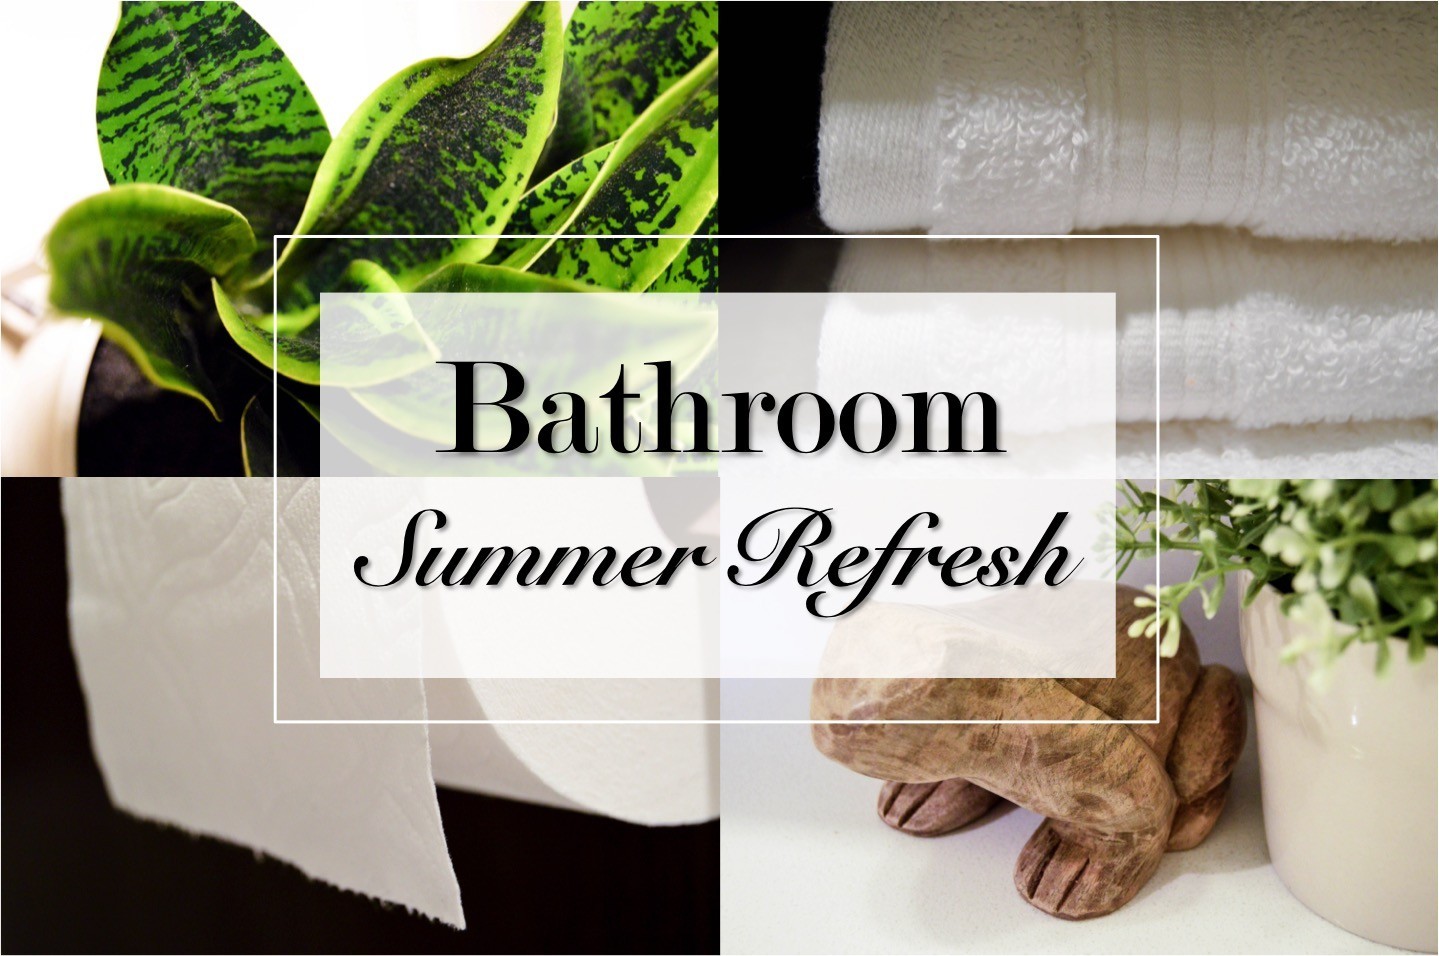 Bathroom summer refresh with summery home decor ideas. A relaxing + classy bathroom sanctuary with an upscale, simple, contemporary, + modern design. By adding a few details, I was able to create a perfectly classy summer sanctuary in my bathroom. I share 5 bathroom summer refresh tips with pictures! Bathroom tour.